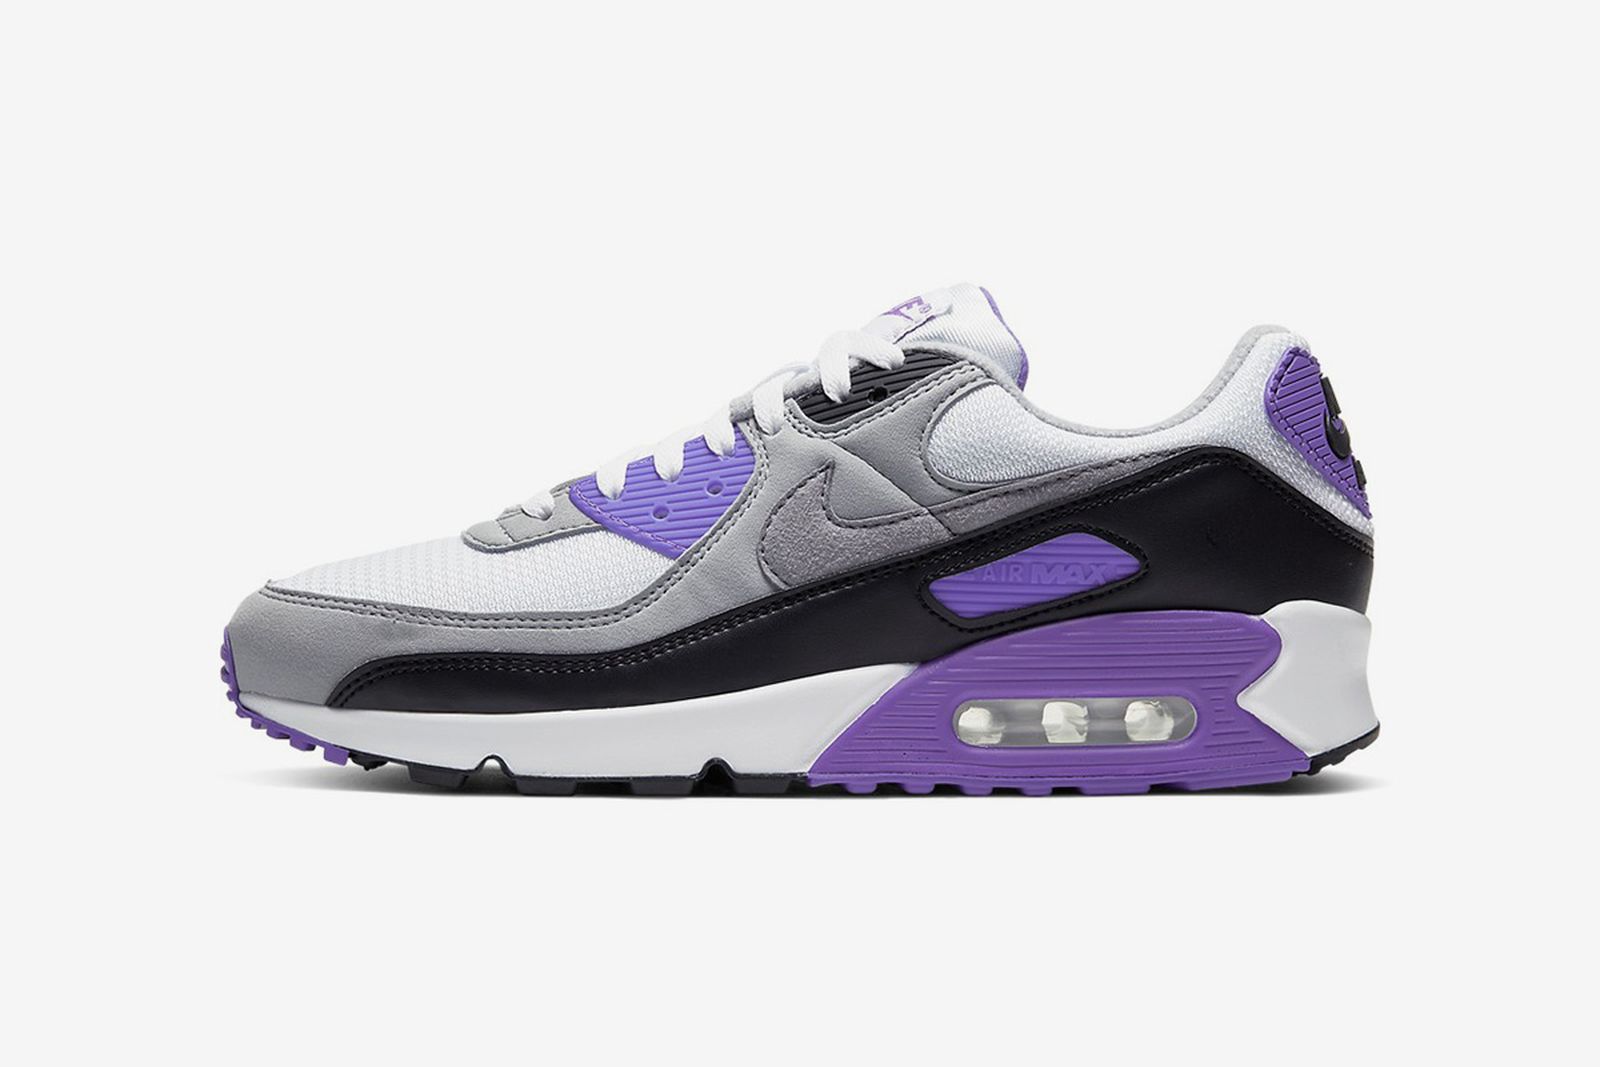 nike-air-max-90-30th-anniversary-colorways-release-date-price-1-06